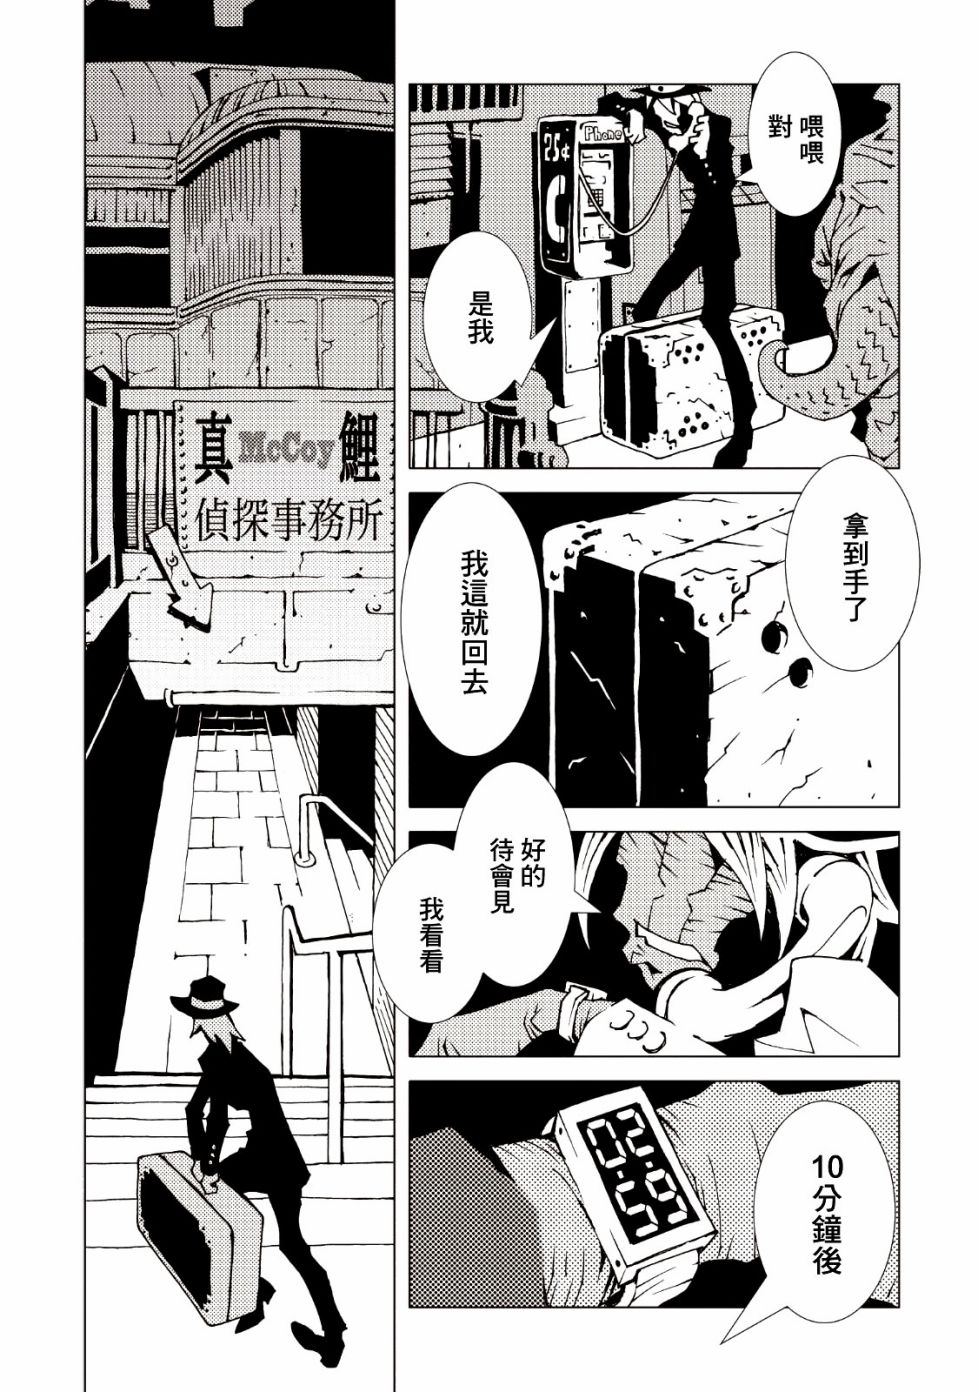 AREA51 - 第37話 - 4